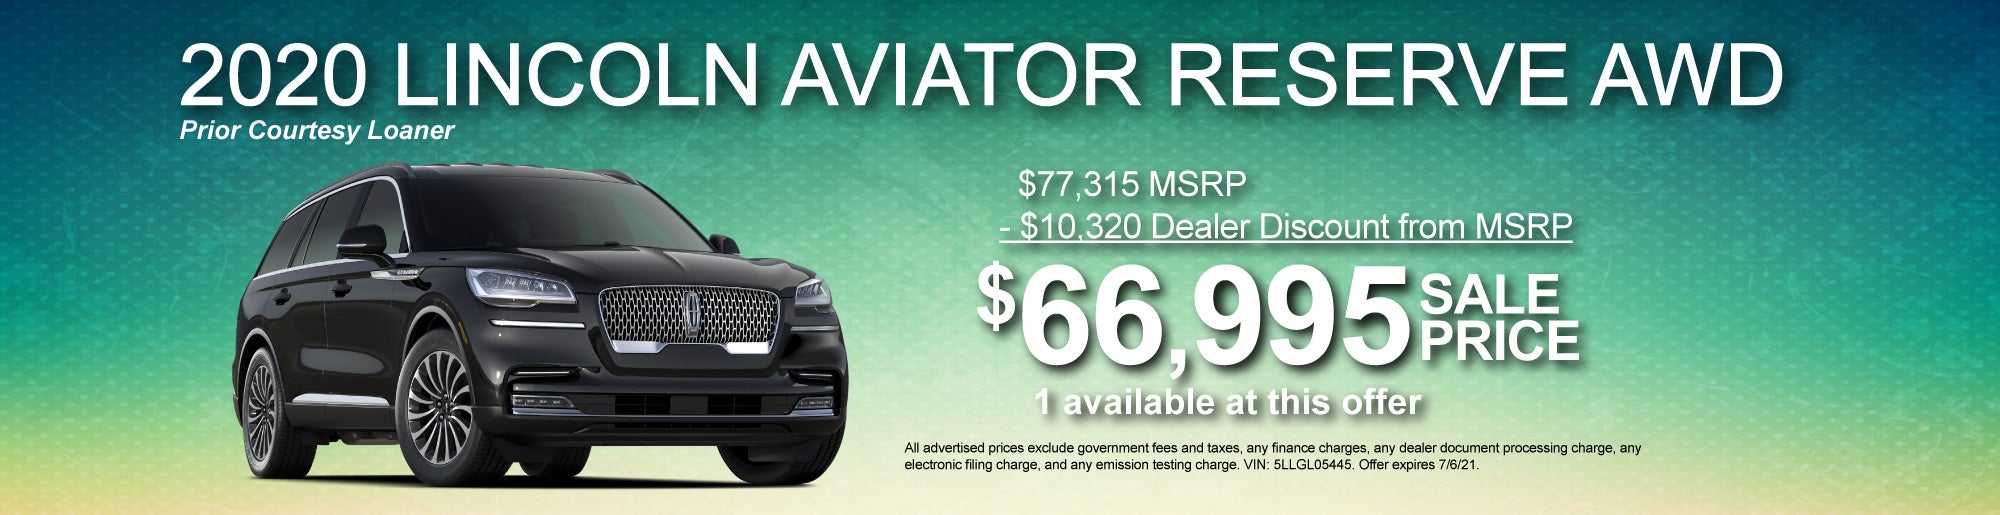 Over $10,000 off MSRP for a 2020 Aviator Reserve